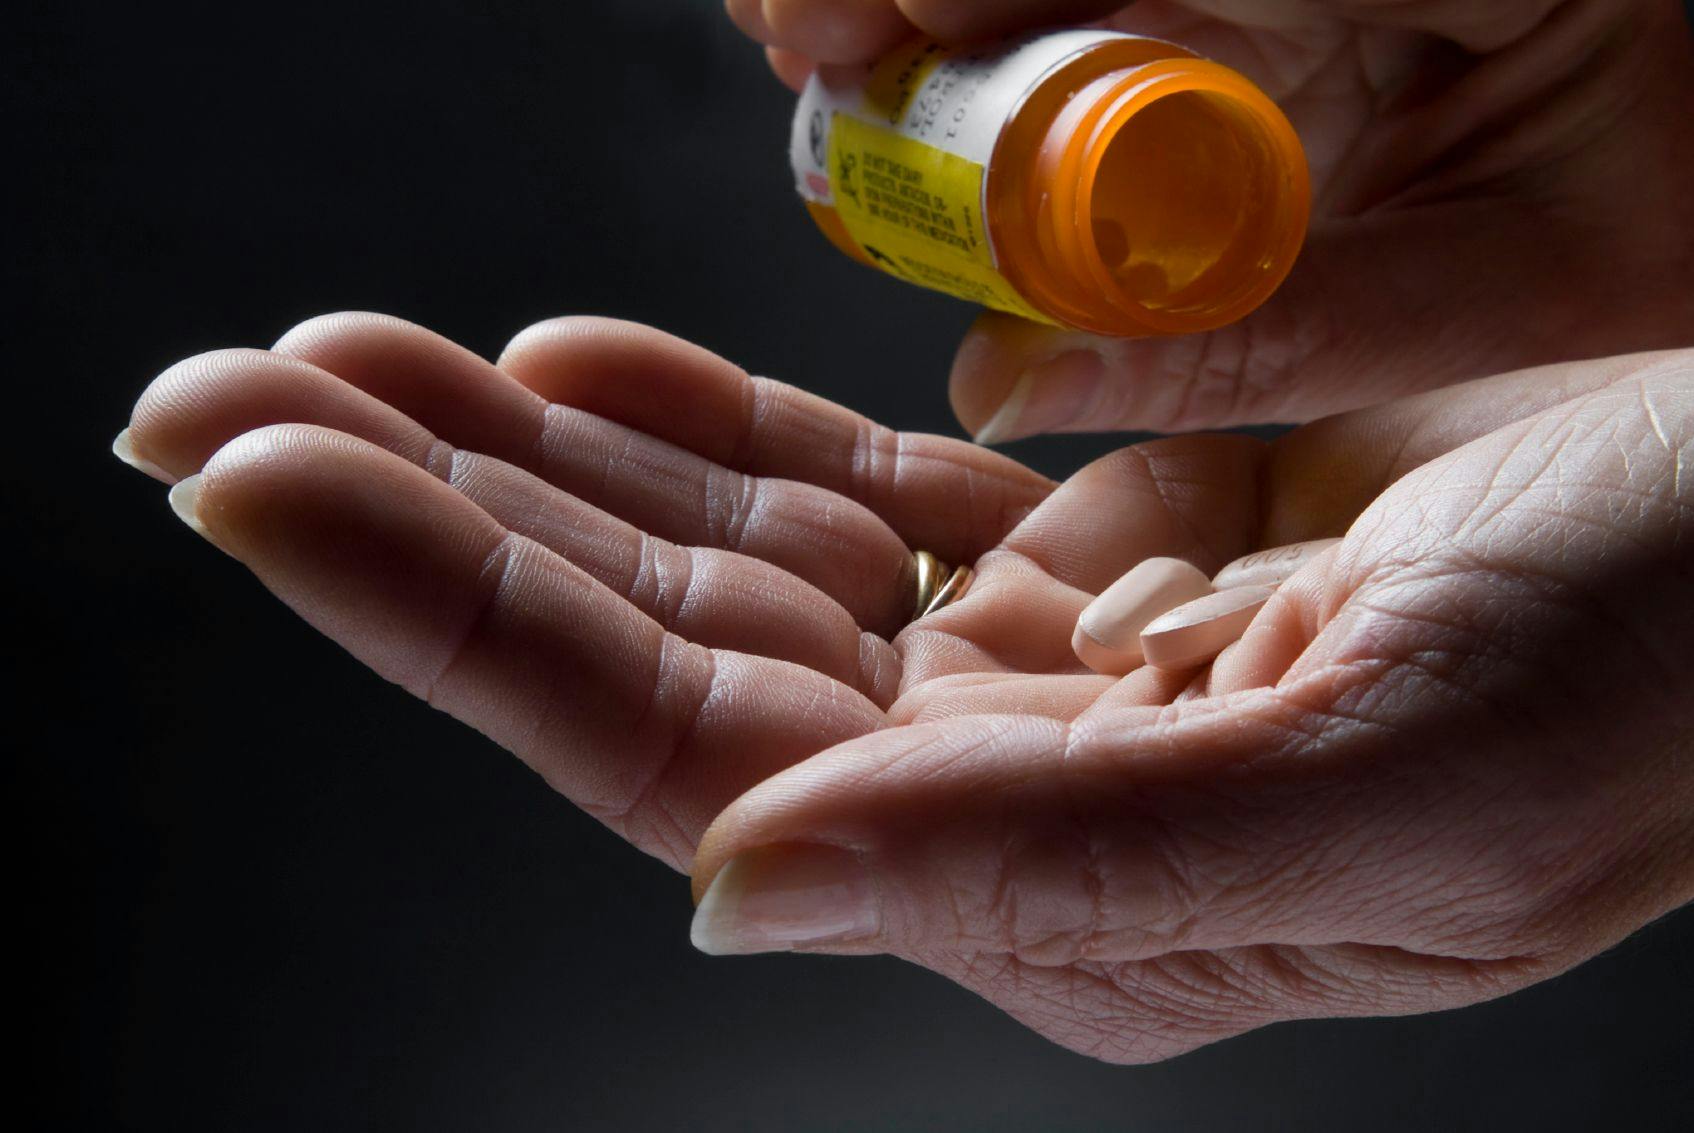 woman emptying pills into her hand 